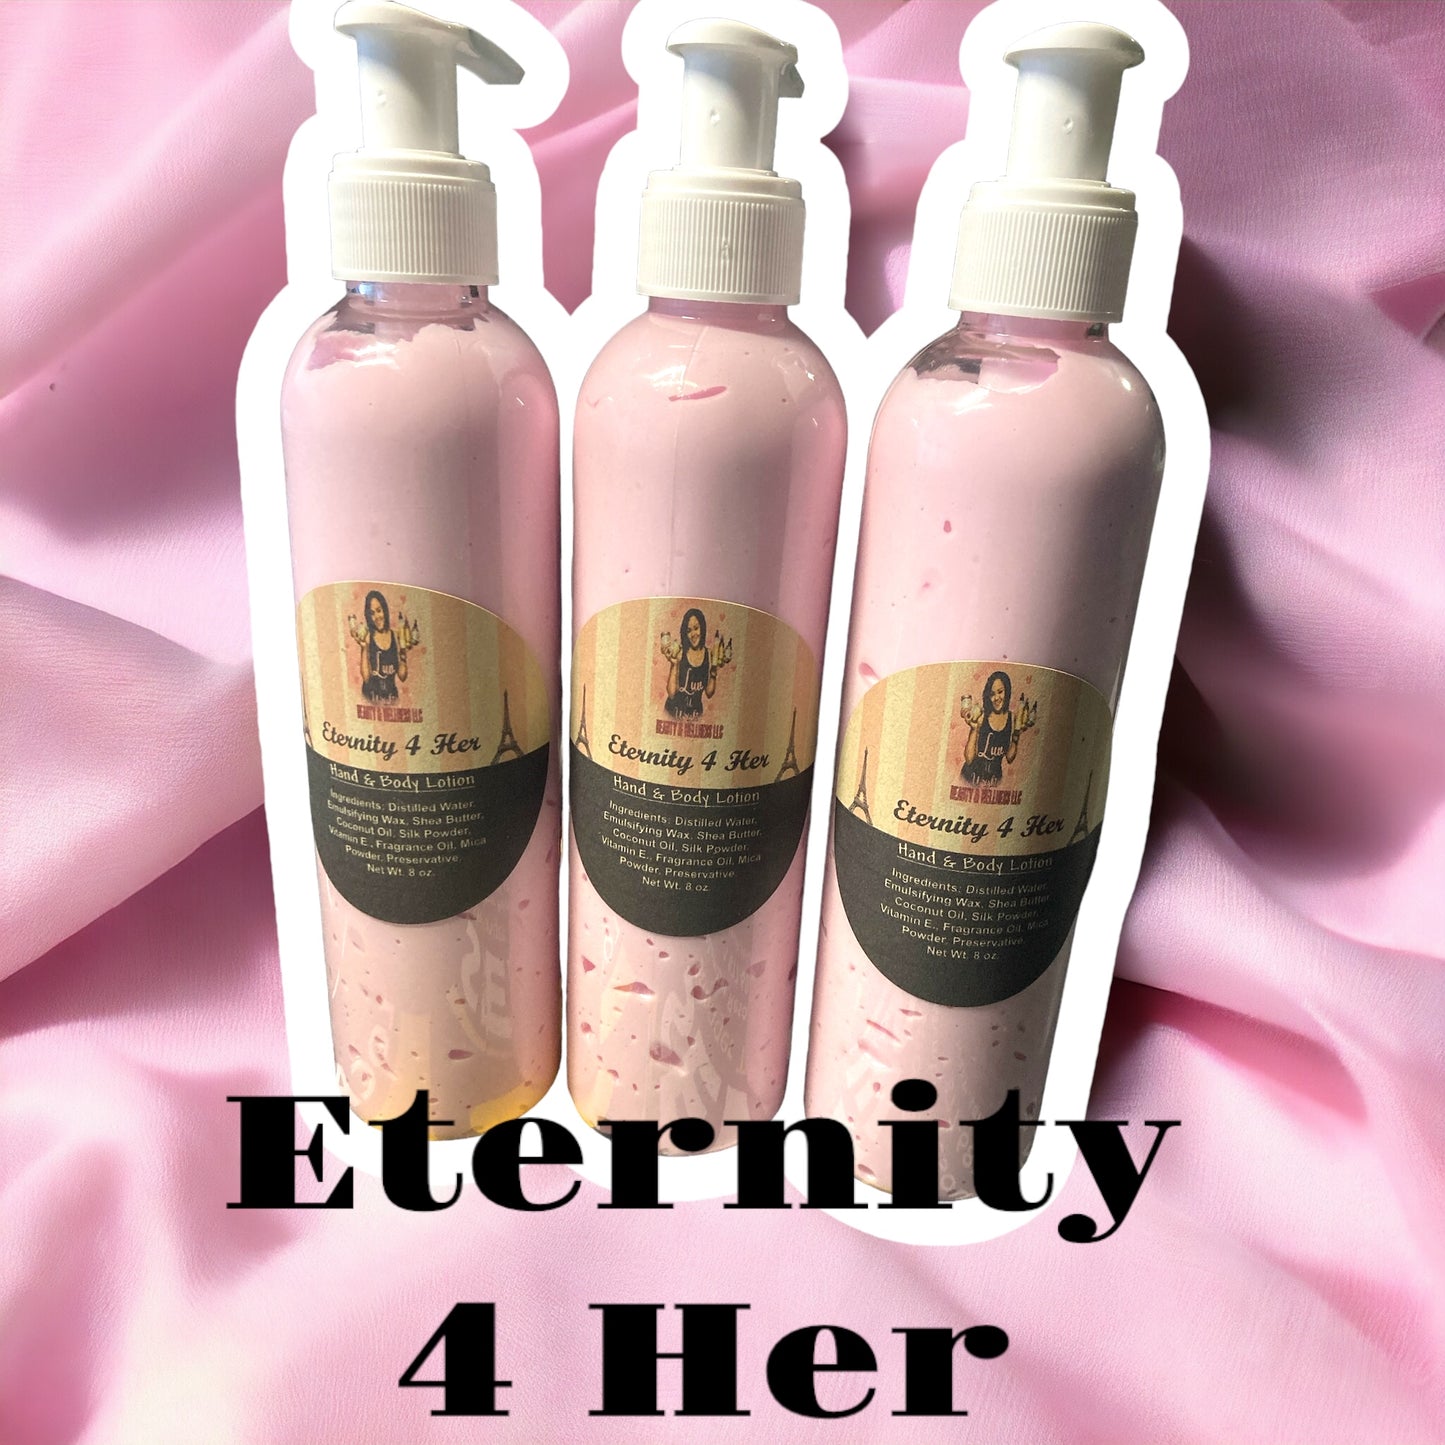 Moisturizing Hand & Body Lotions. Handmade With lots of LUV…. Everyone Loves these!!!